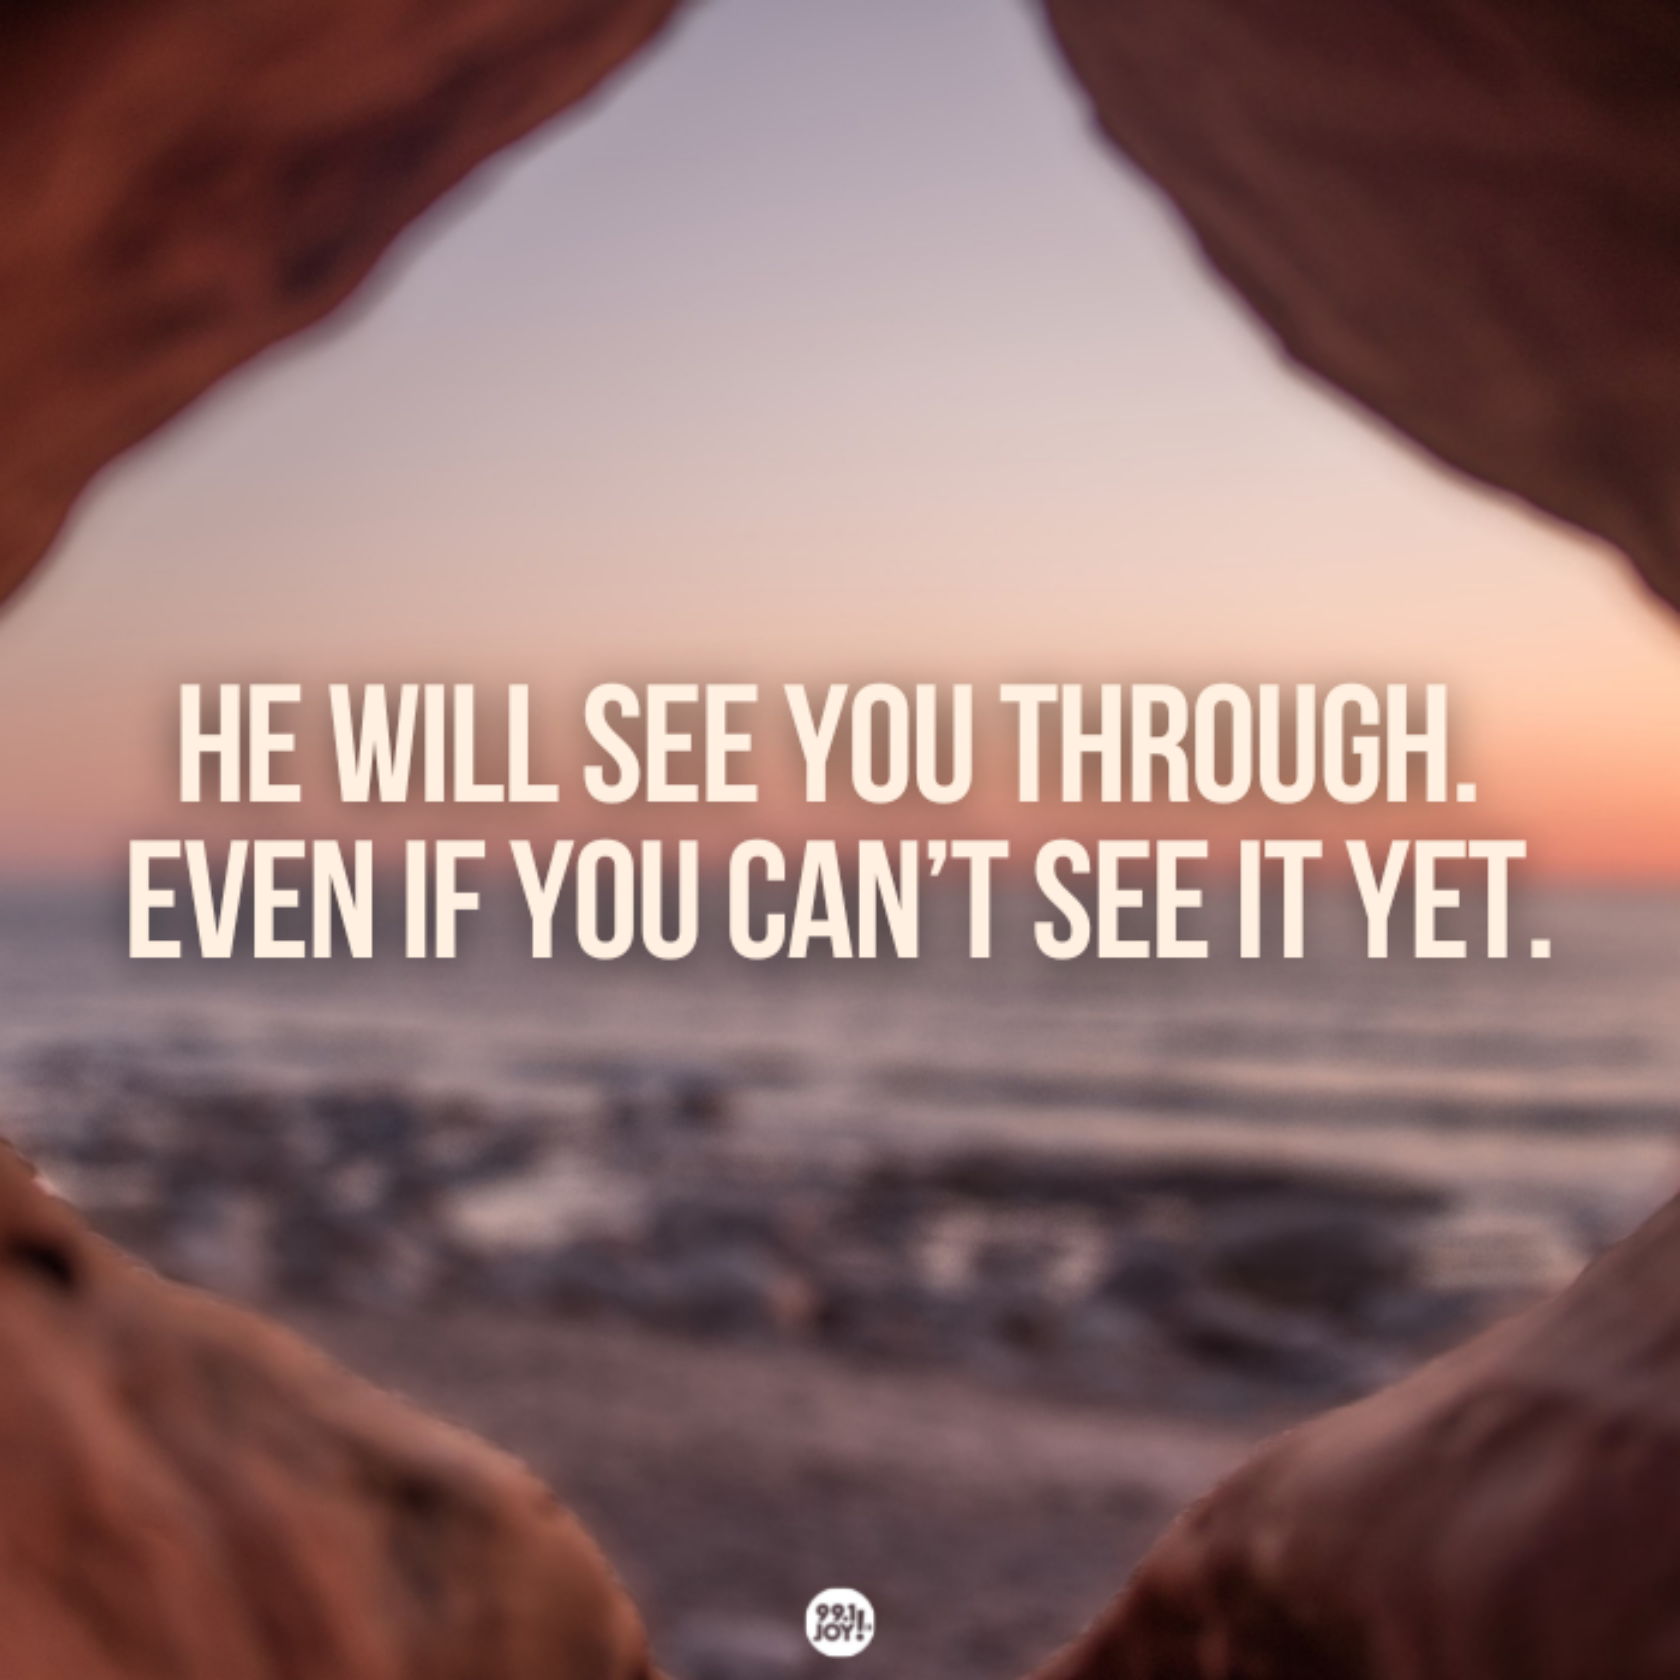 He Will See You Through. Even If You Can’t See It Yet.